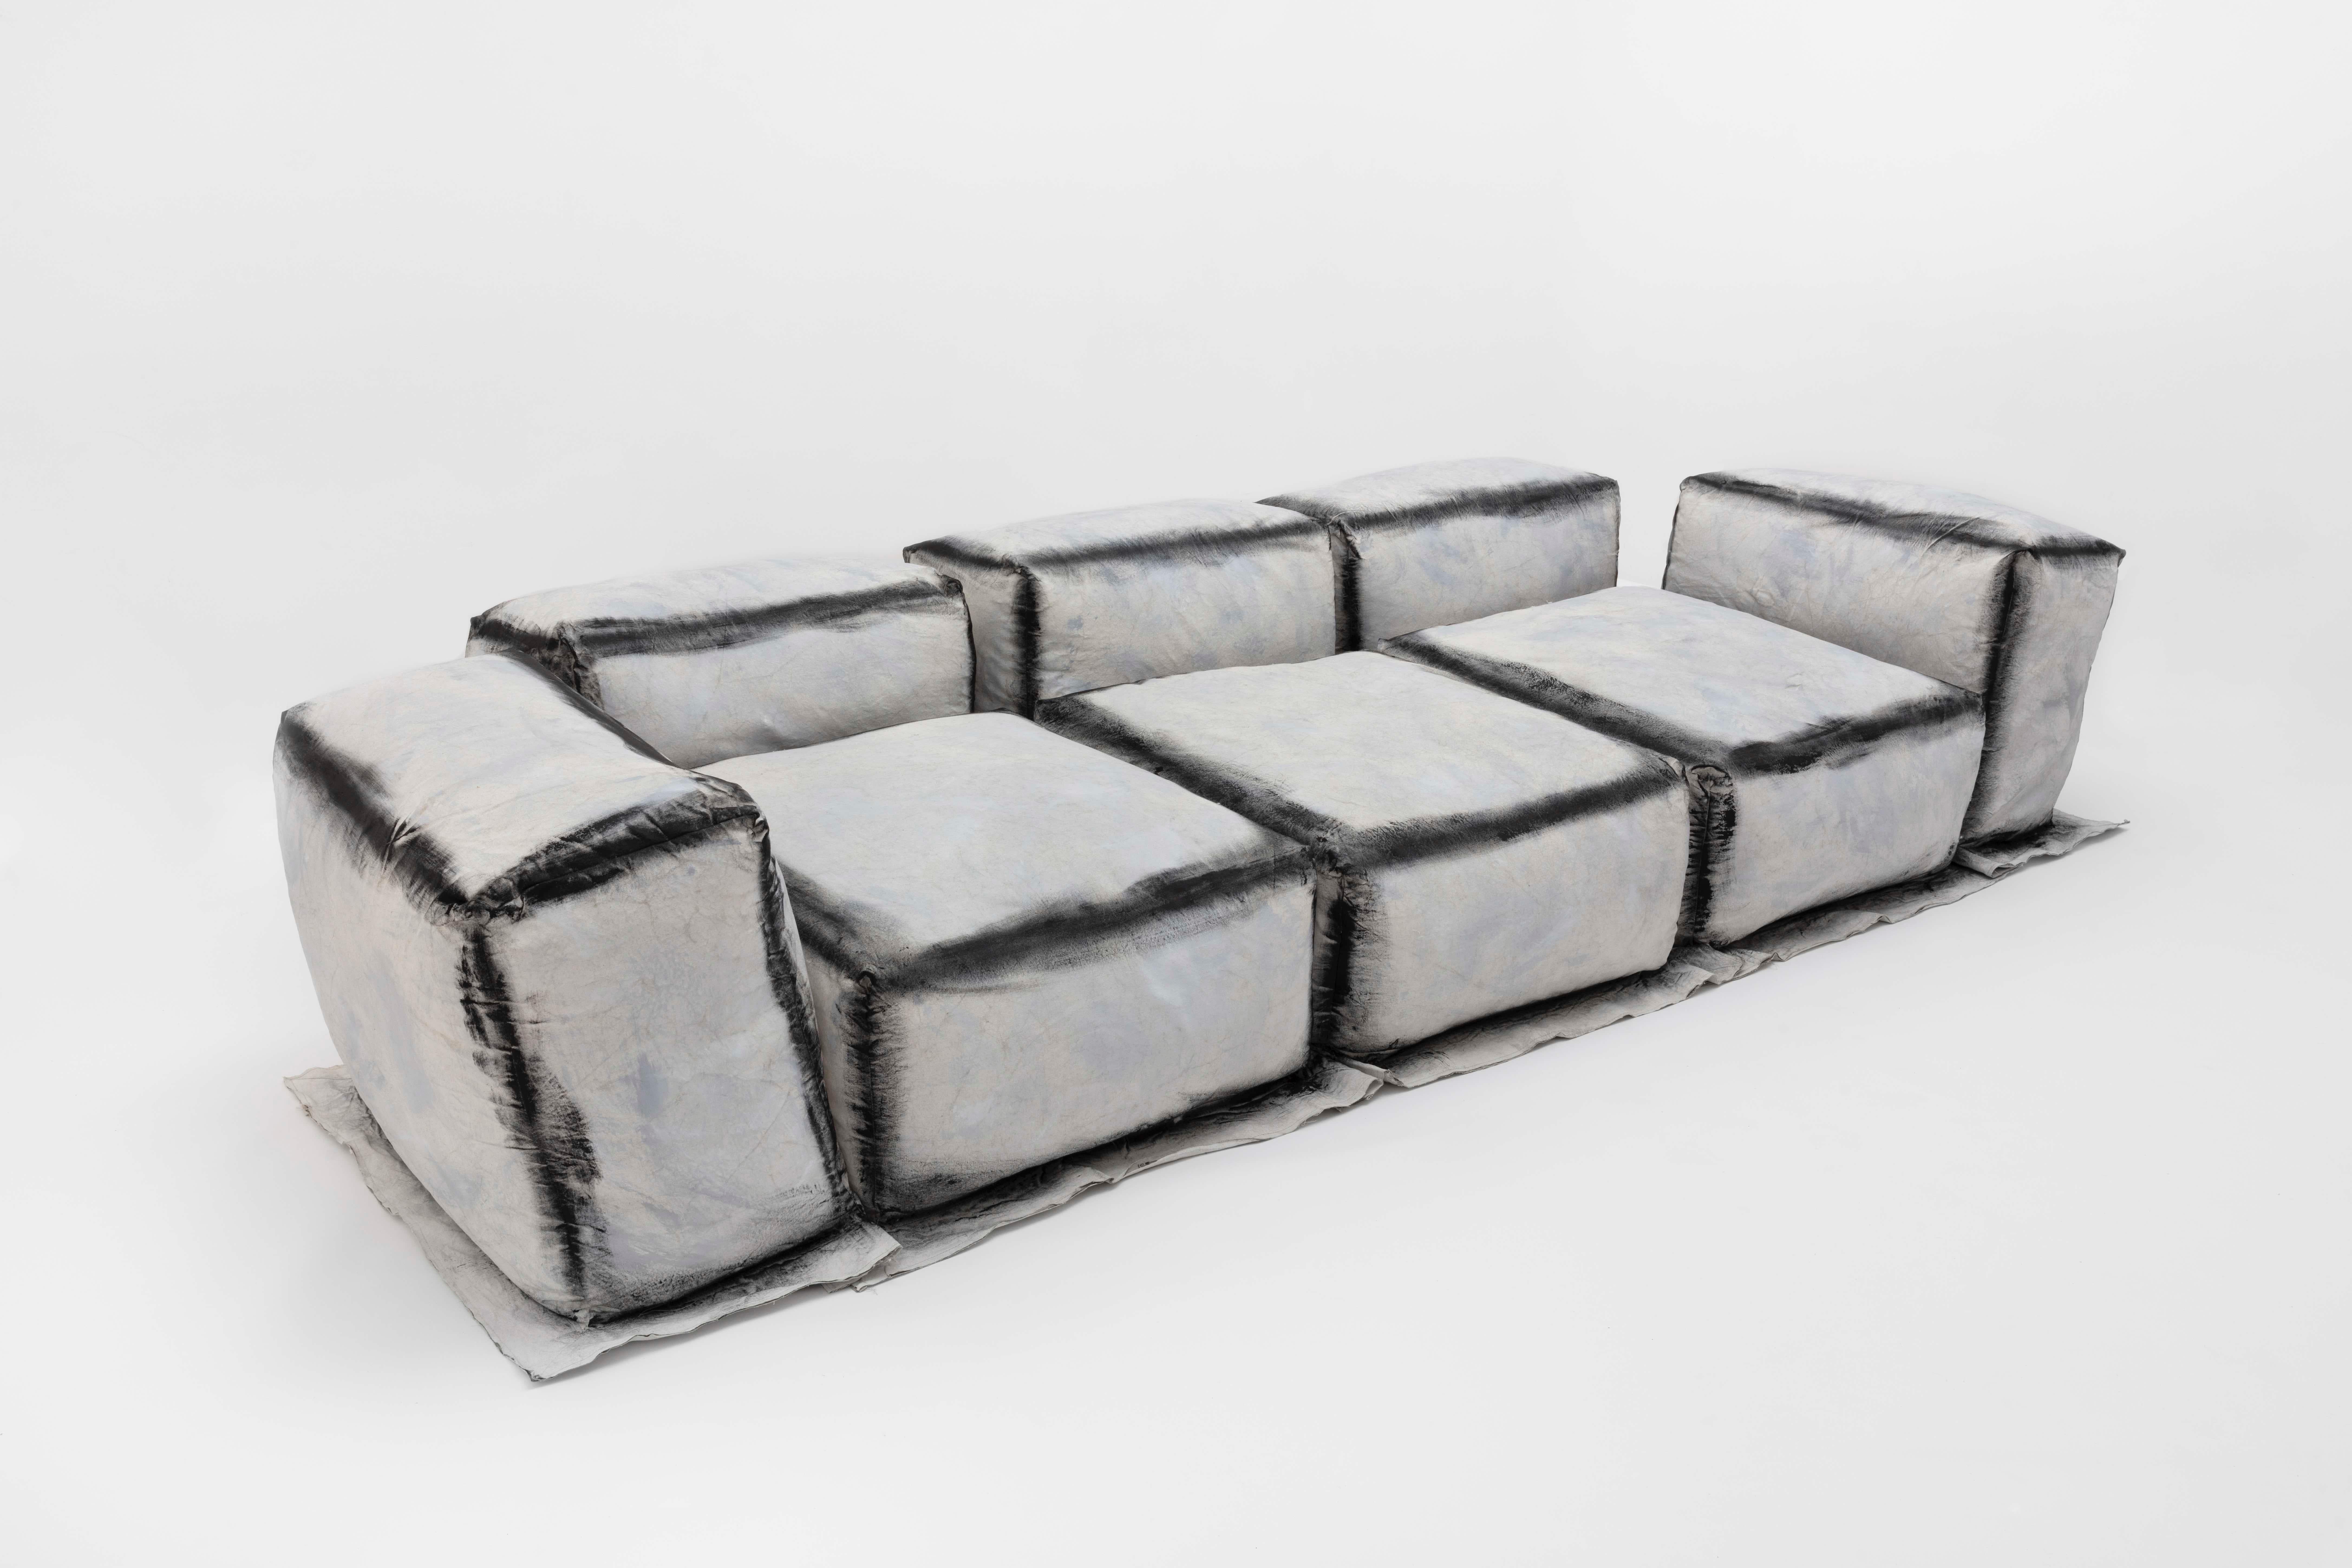 Faye Toogood [British, b. 1977]
Maquette 234 / canvas and foam sofa, charcoal, 2020
Primed, washed canvas, upholstery foam, fabric paint
Measures: 27.5 x 134 x 53 inches
70 x 340 x 135 cm

Faye Toogood was born in the UK in 1977 and graduated